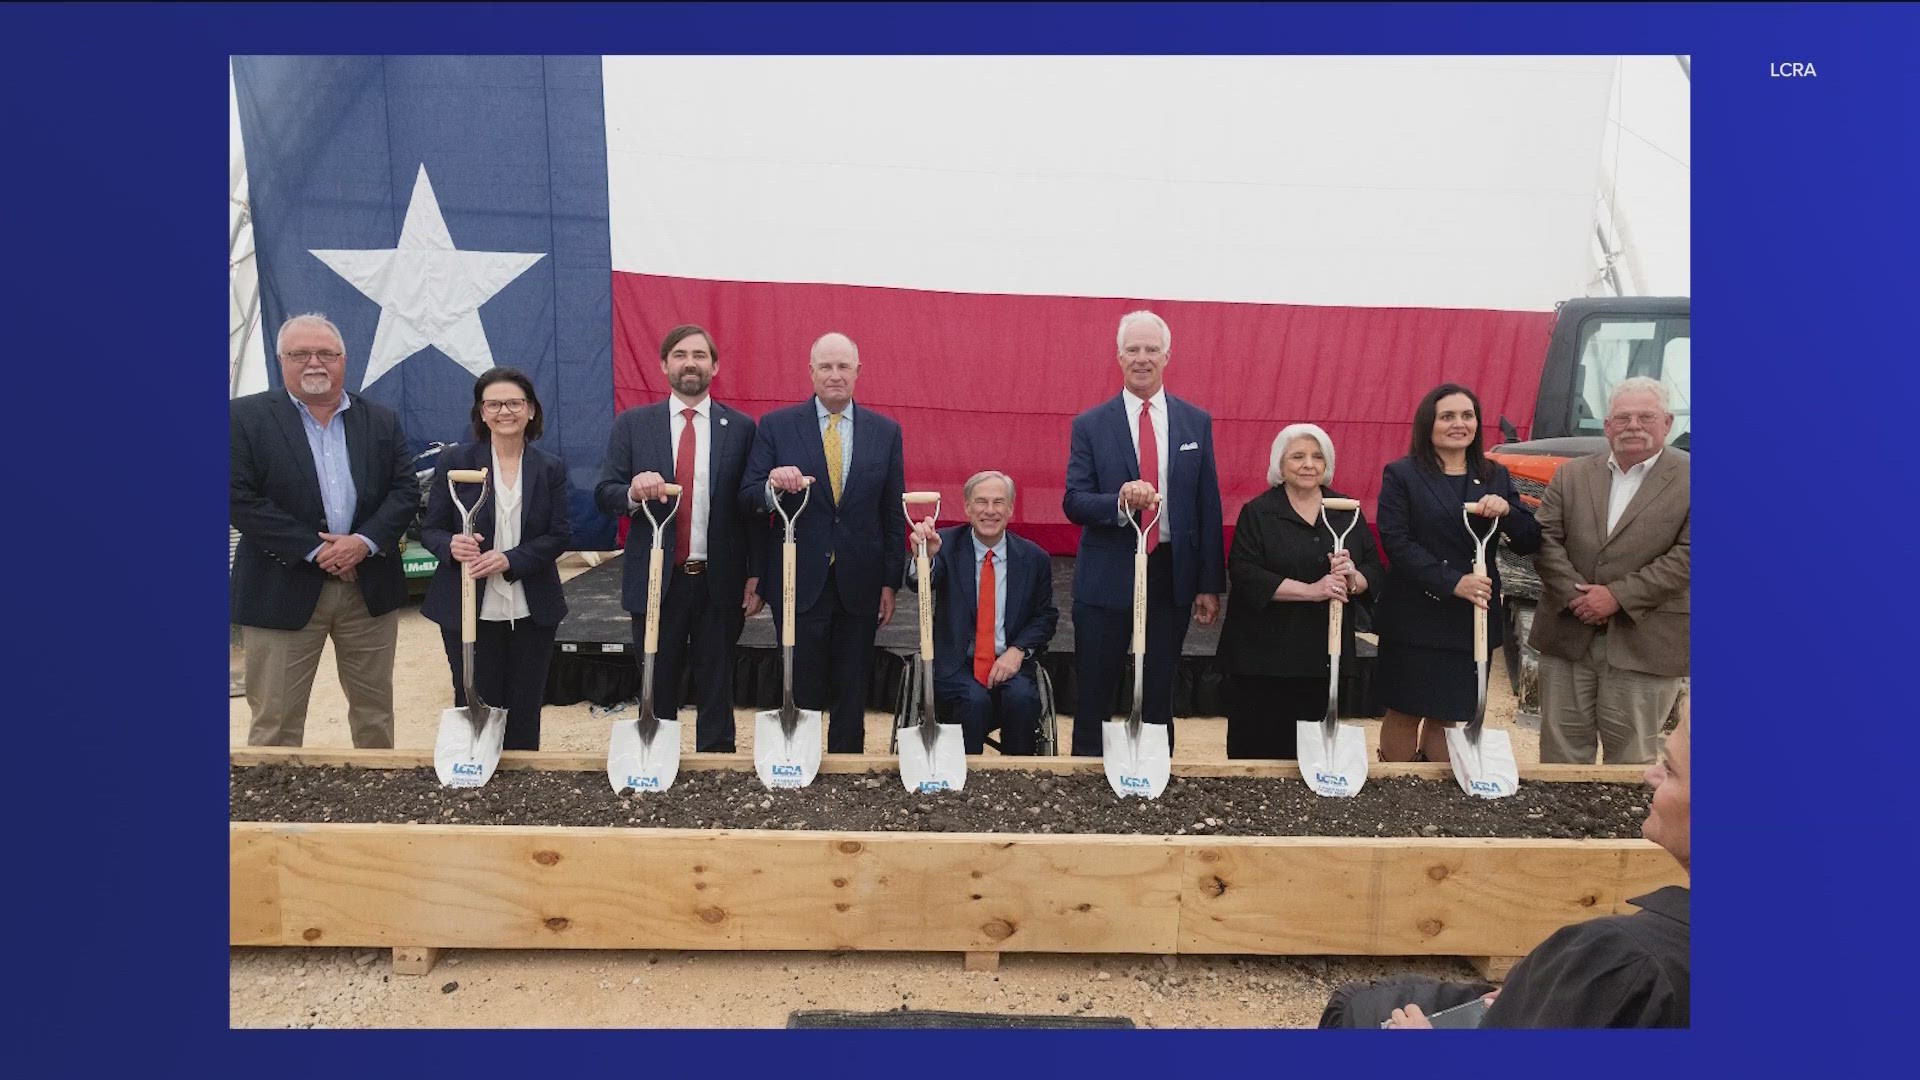 Crews broke ground on Tuesday on a new LCRA peaker power plant in Caldwell County.